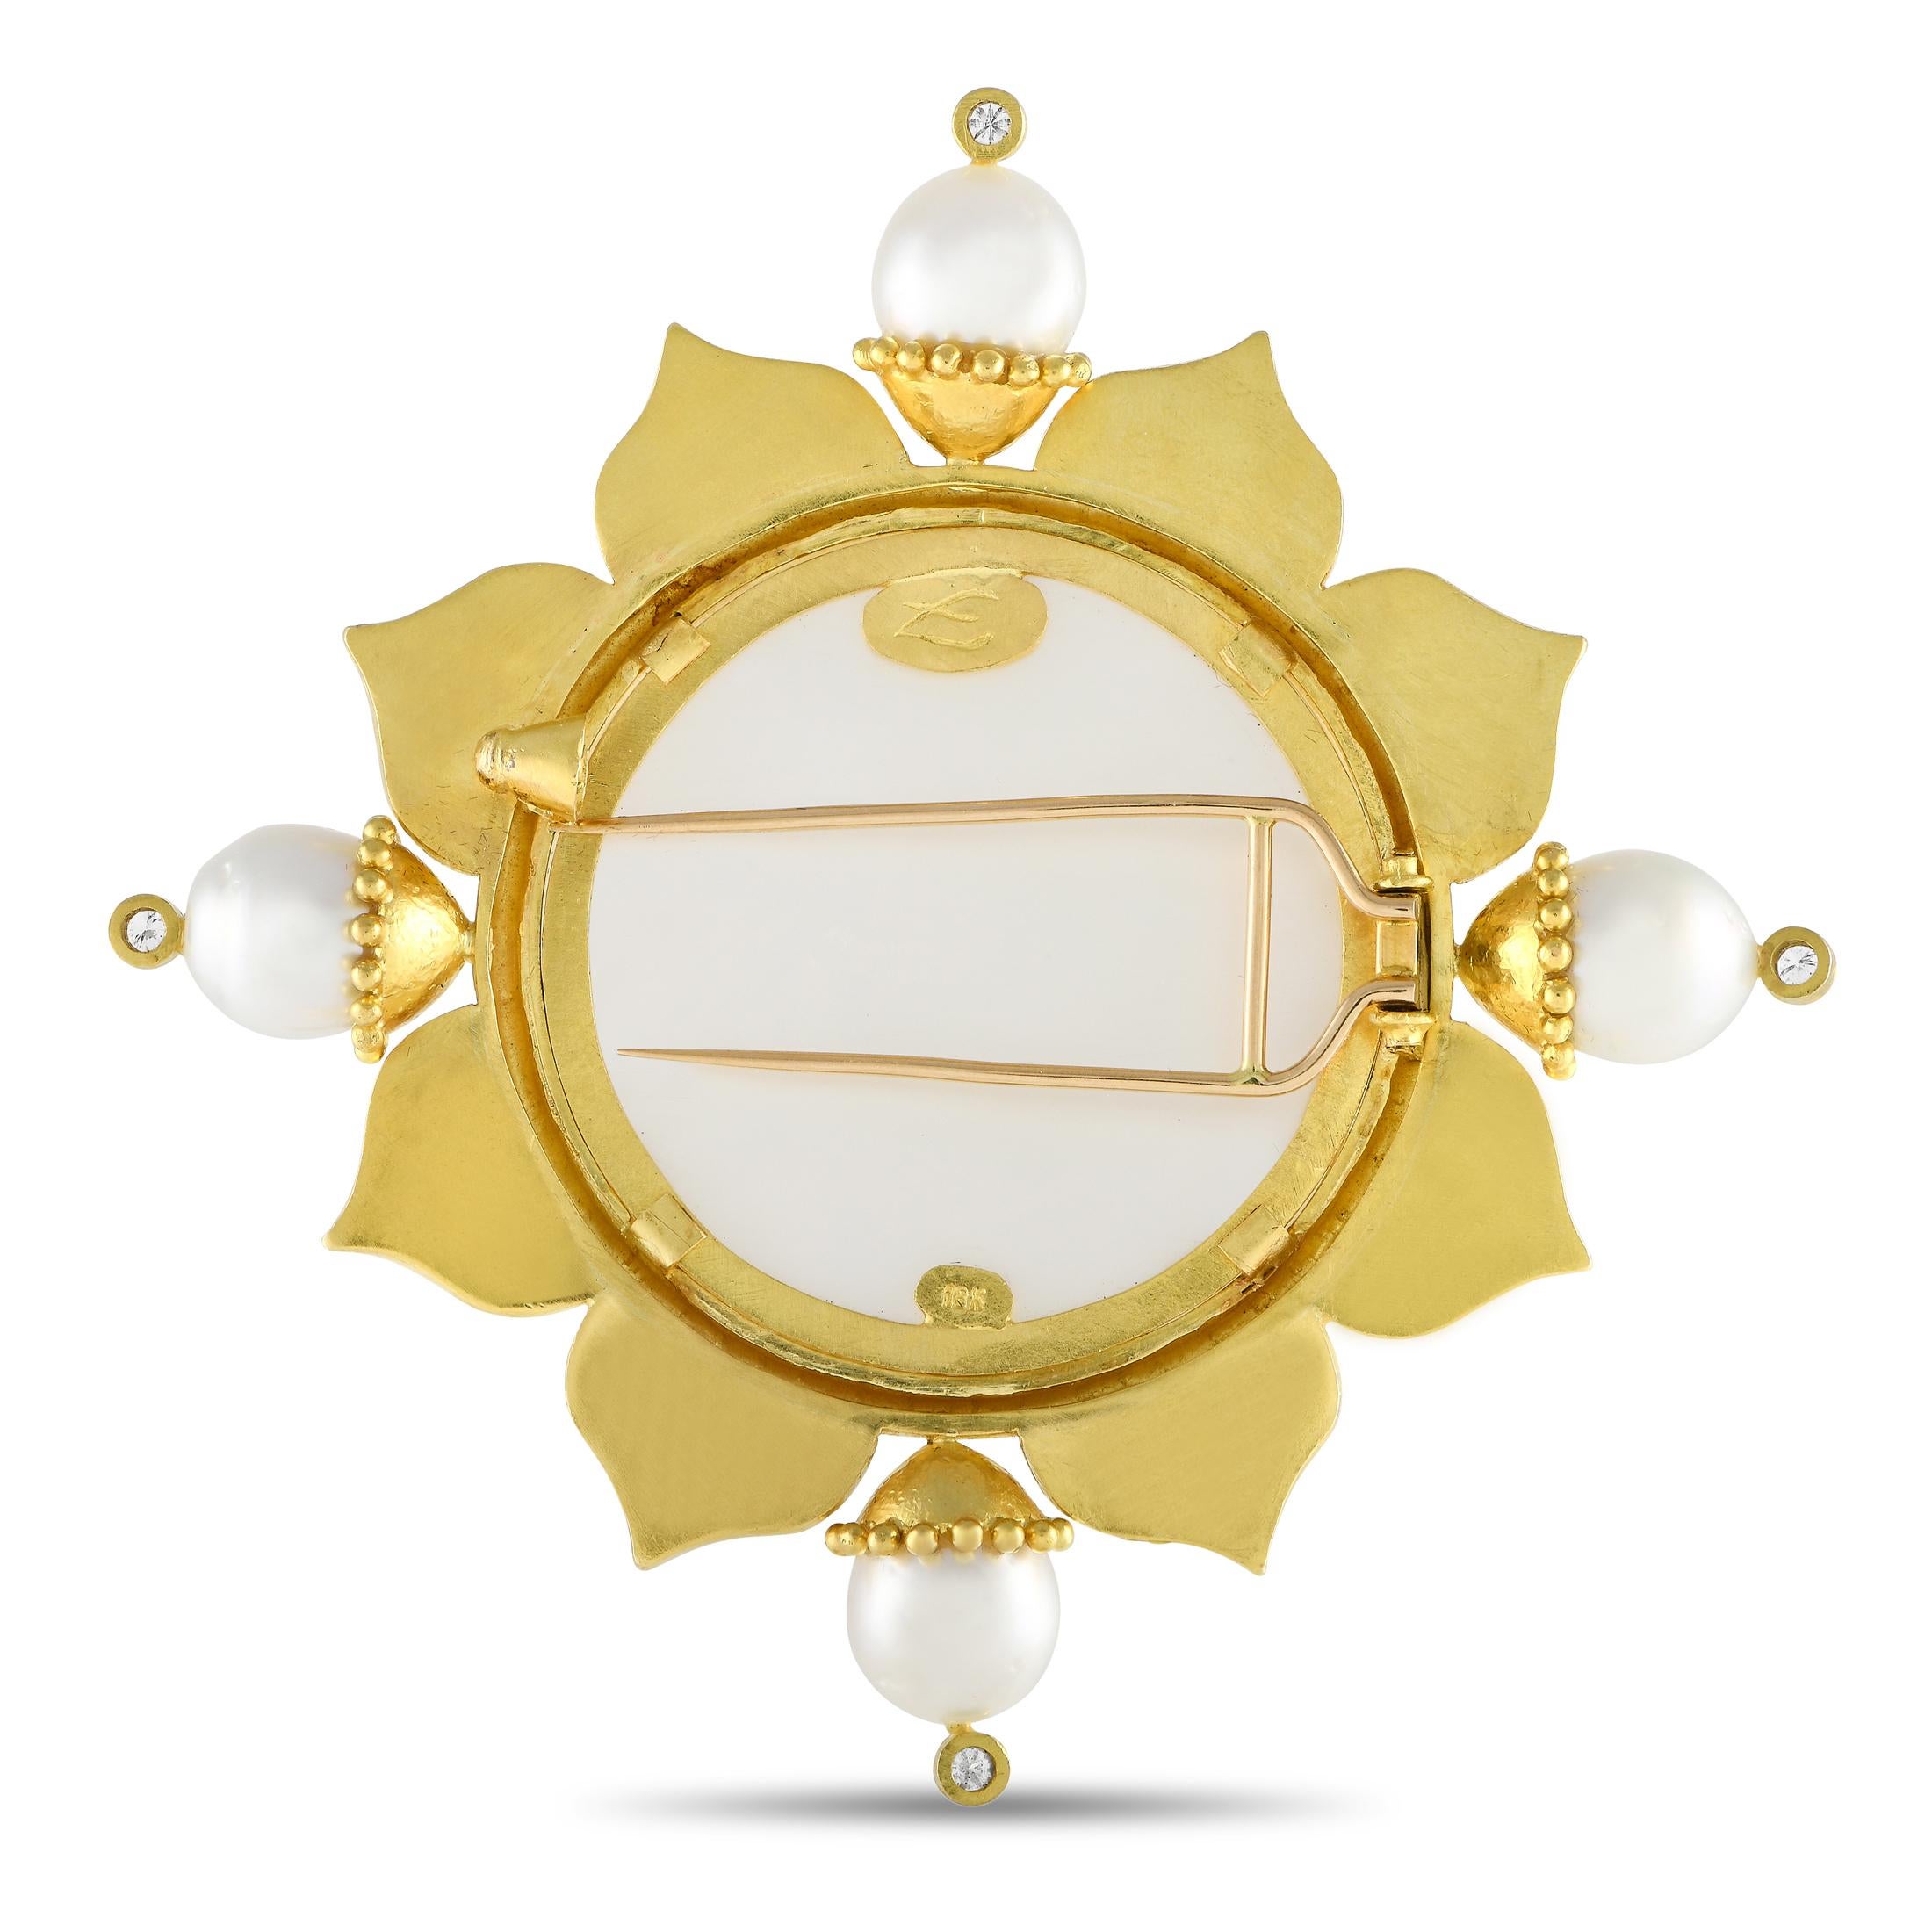 This opulent Elizabeth Locke brooch exudes a sense of refinement. A breathtaking Mother of Pearl at the center comes to life thanks to classical motifs, while the 18K Yellow Gold and Pearl setting bring the entire design to life. This piece measures